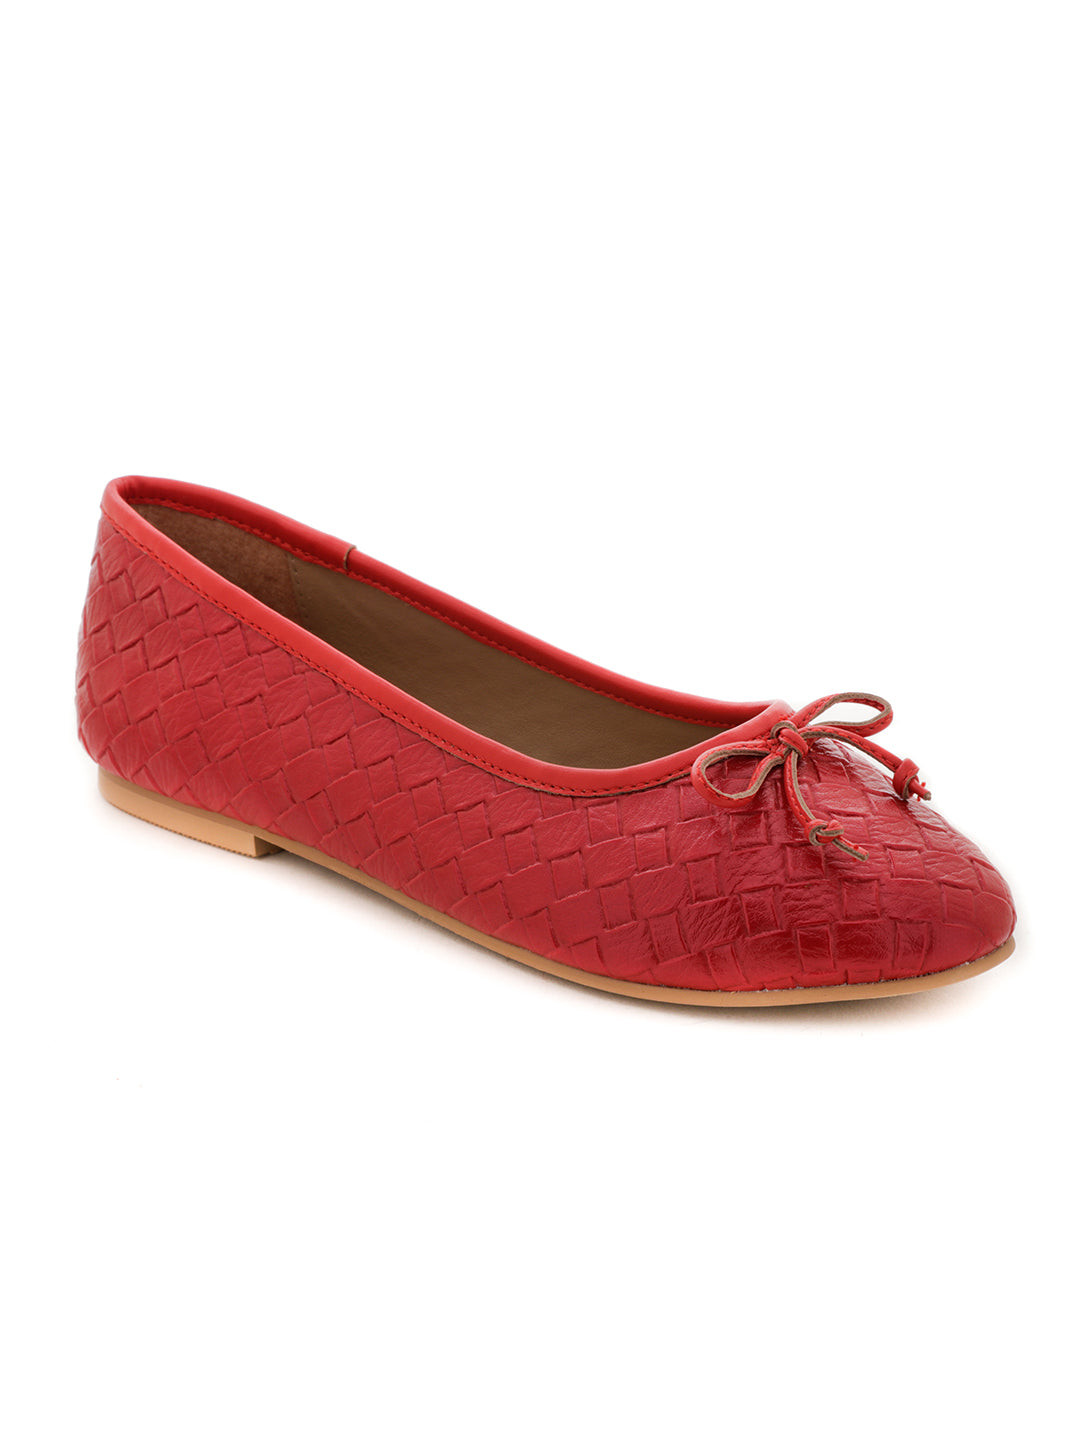 Weave Embossed Red Ballerinas with Bow - Red